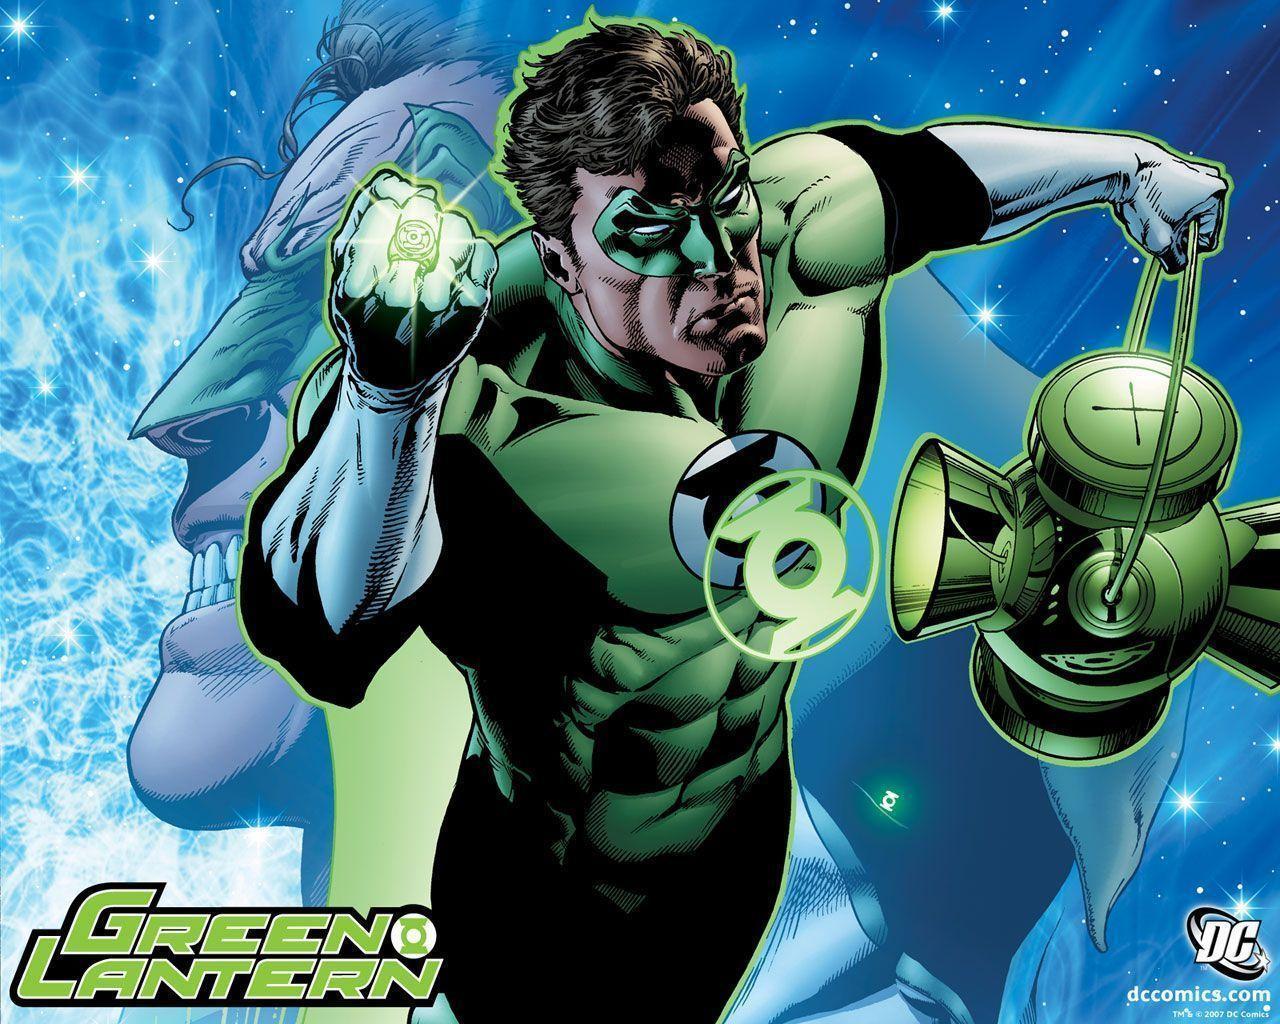 Check this out! our new Green Lantern wallpaper. DC Comics wallpaper